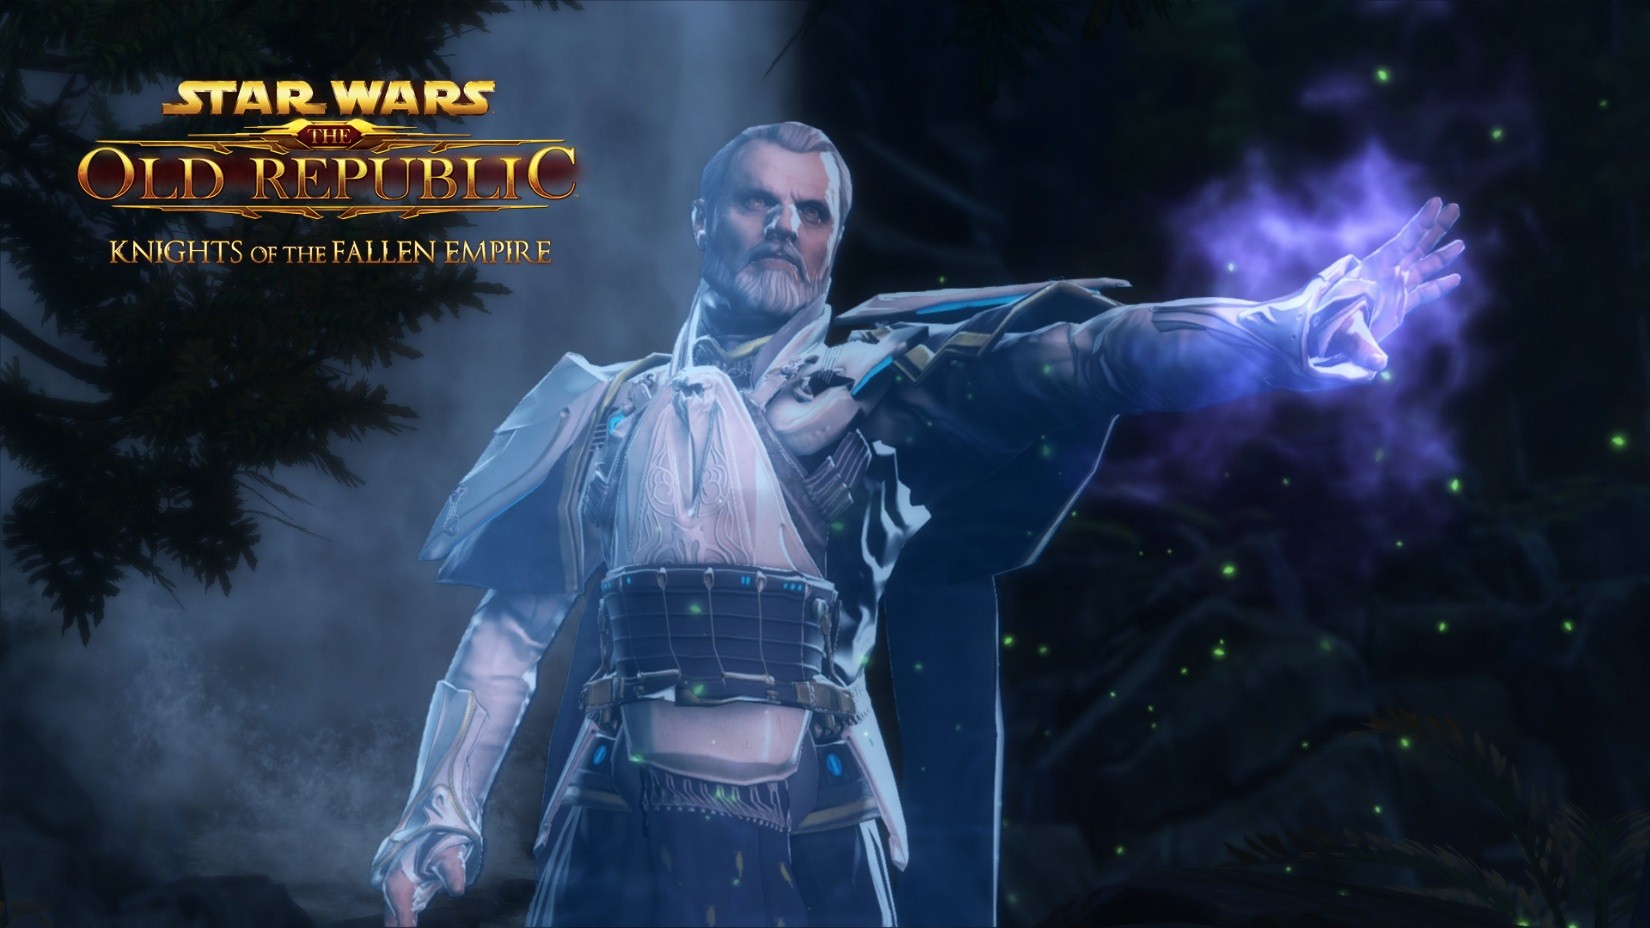 Swtor Obscures visions